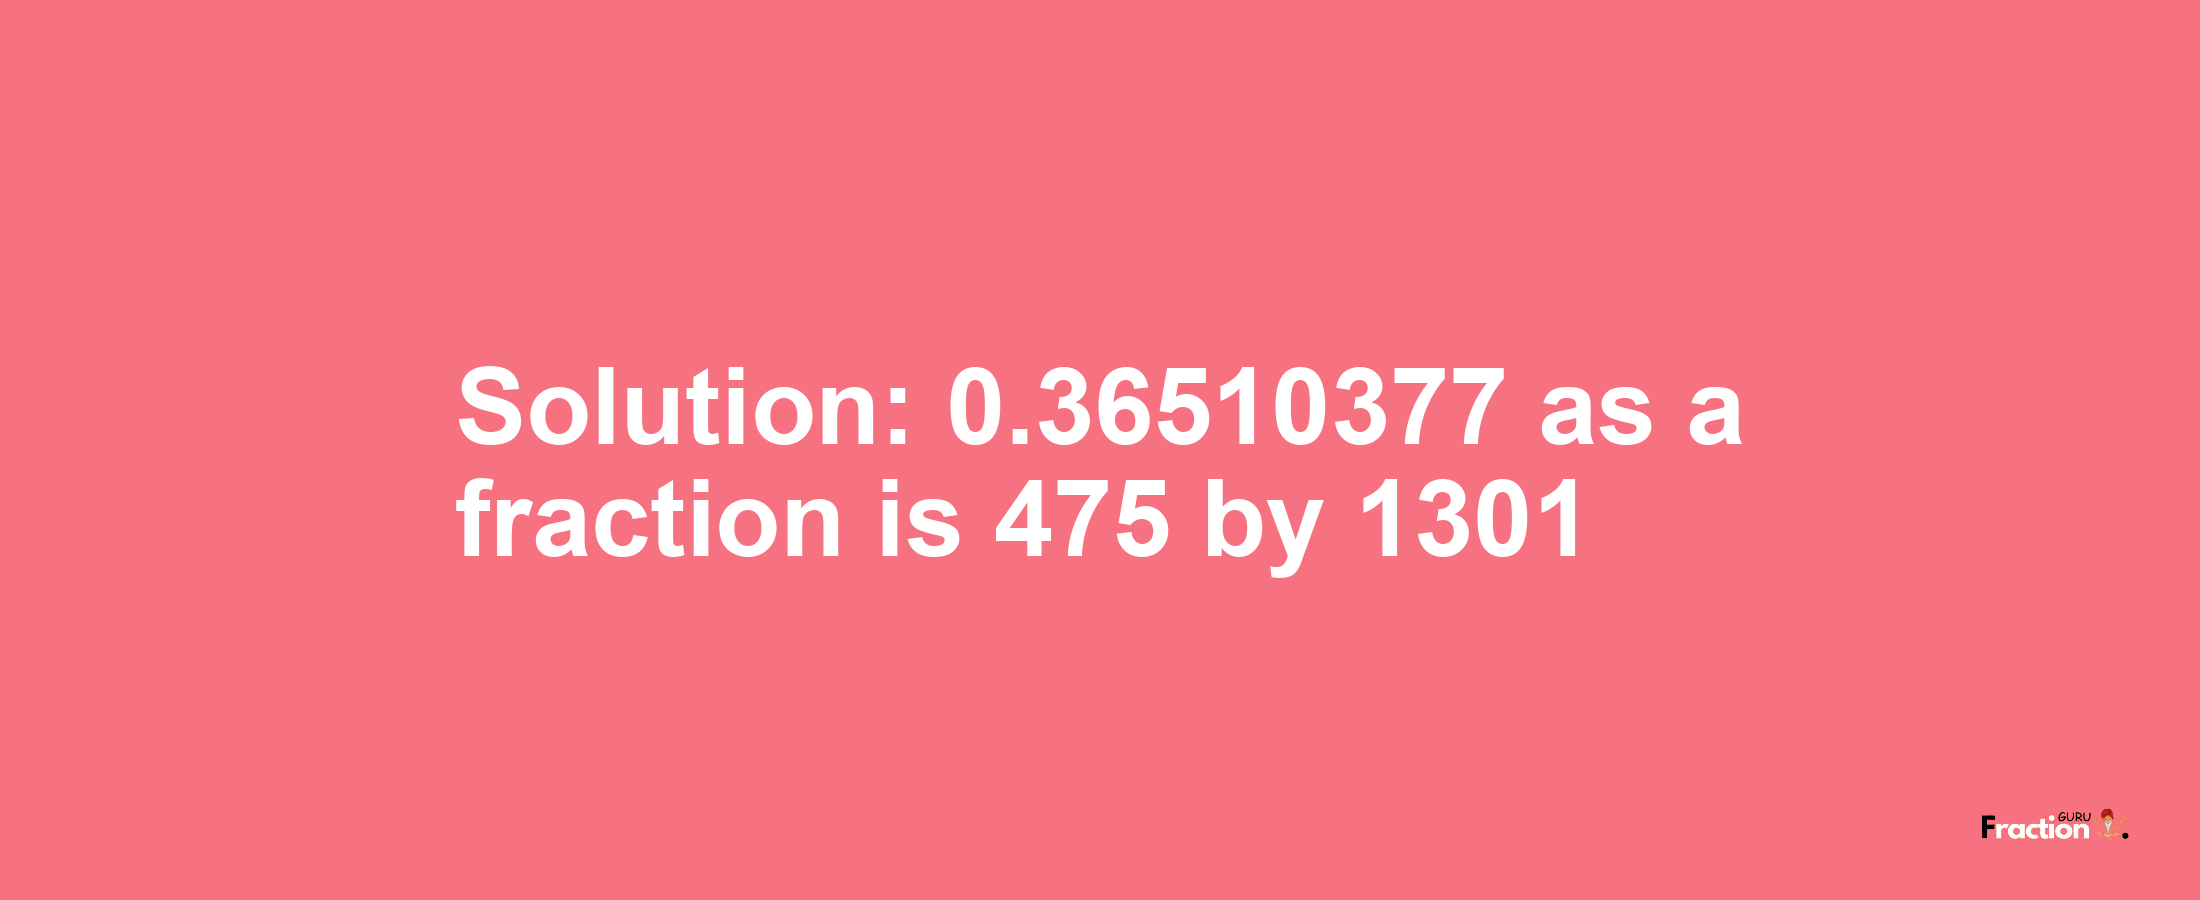 Solution:0.36510377 as a fraction is 475/1301